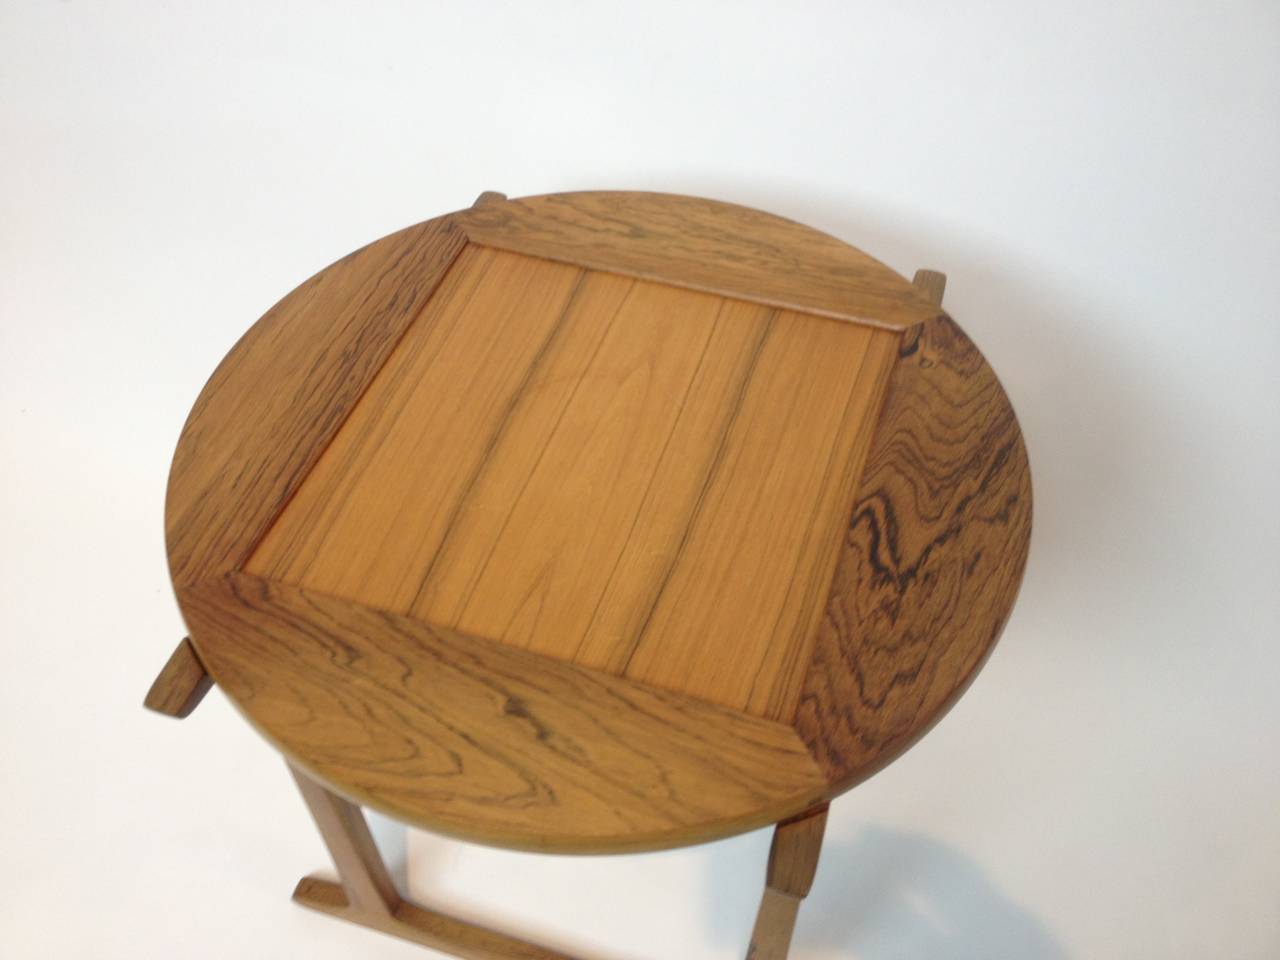 Jens Quistgaard Danish Modern Rosewood Tile Flip-Top End Table In Good Condition For Sale In Victoria, British Columbia